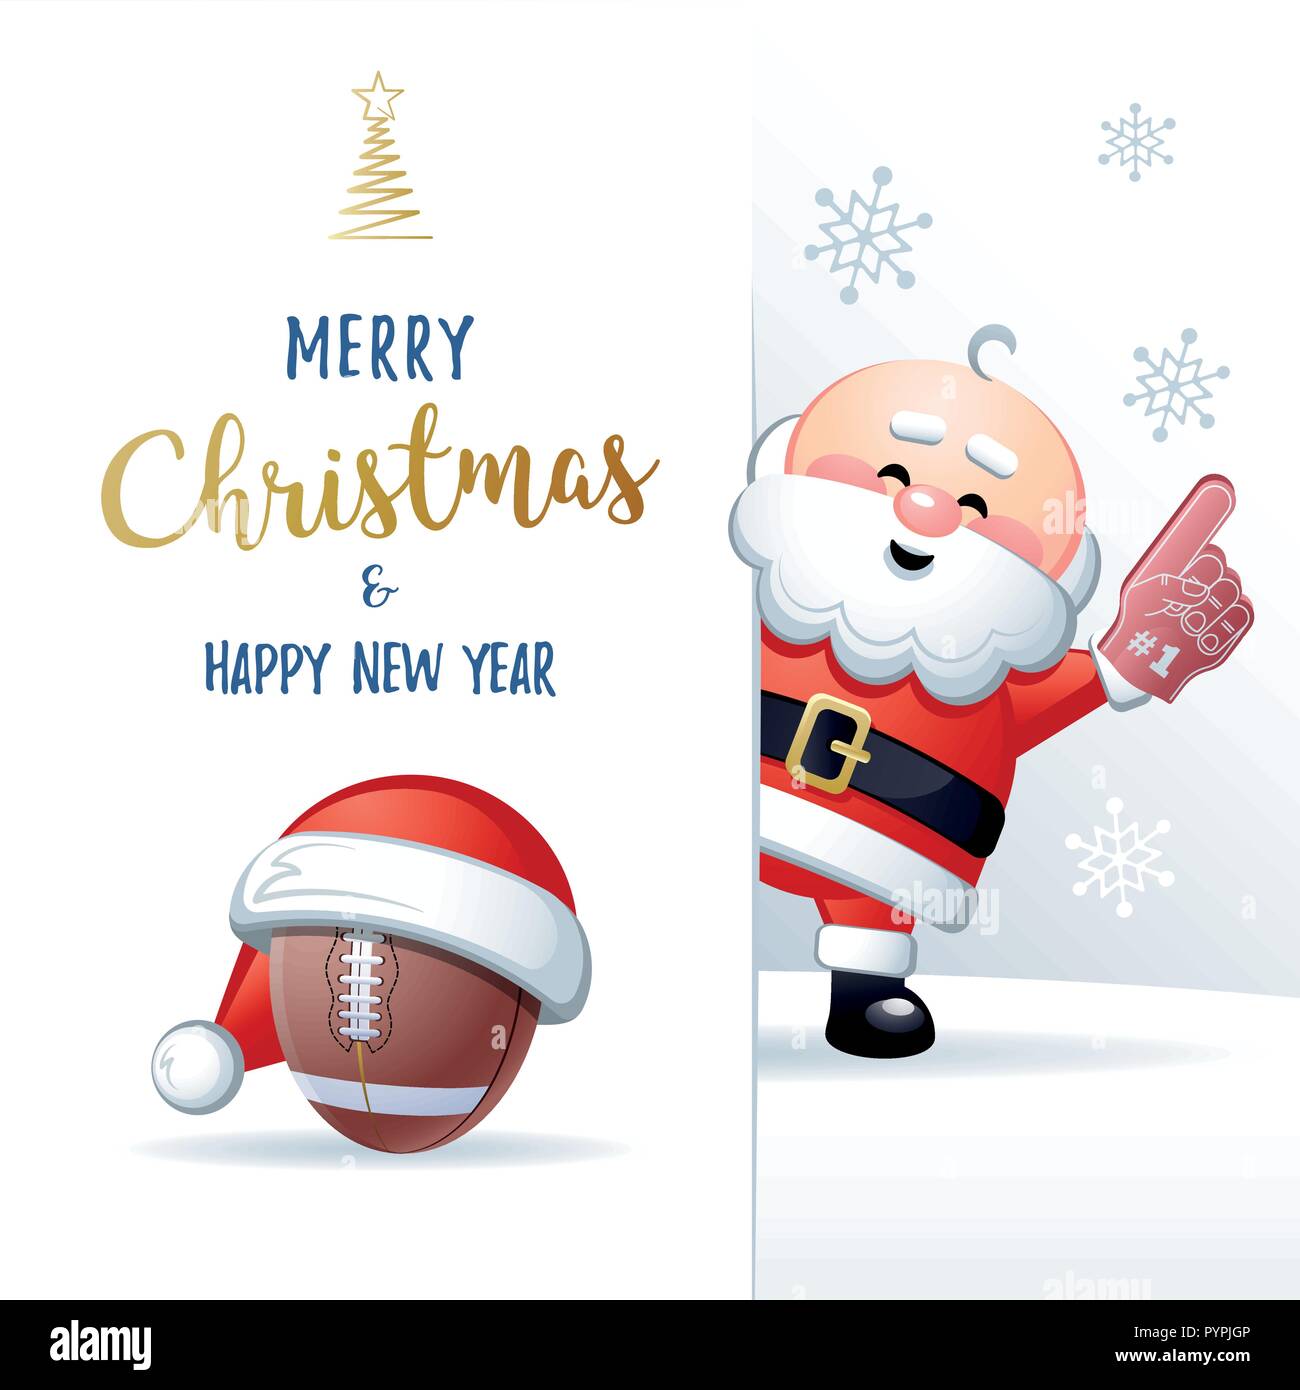 Merry Christmas and Happy New Year 2020 animation. Santa Claus